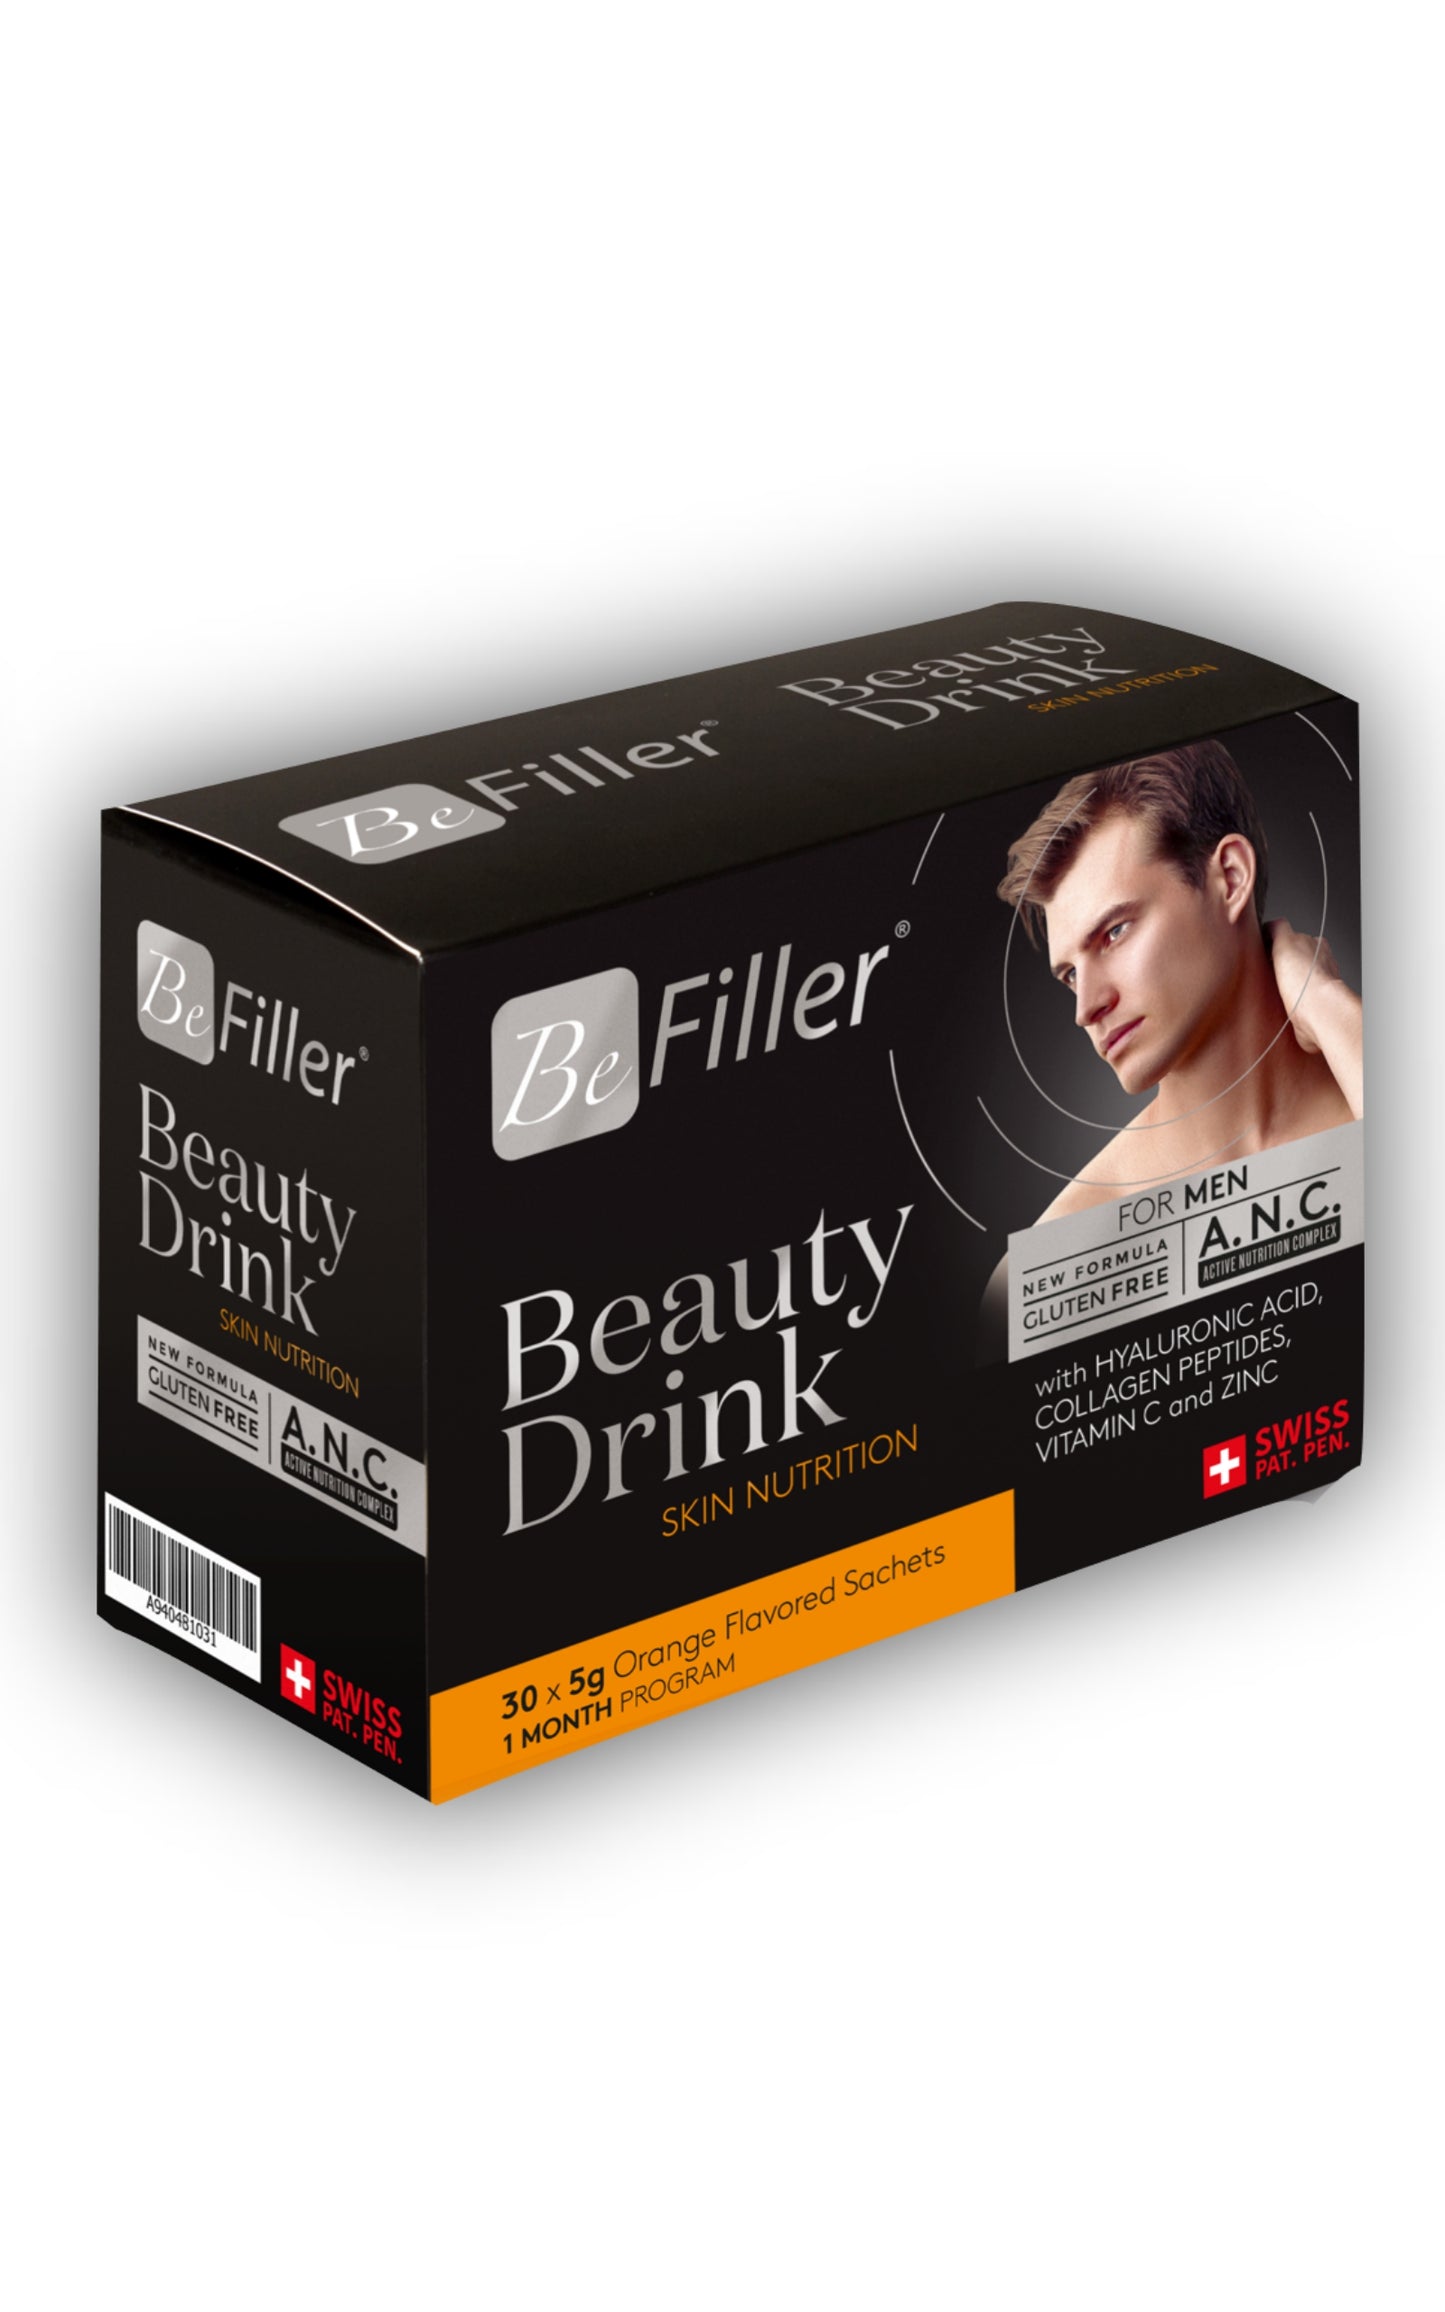 BEAUTY DRINK beauty cocktail for men